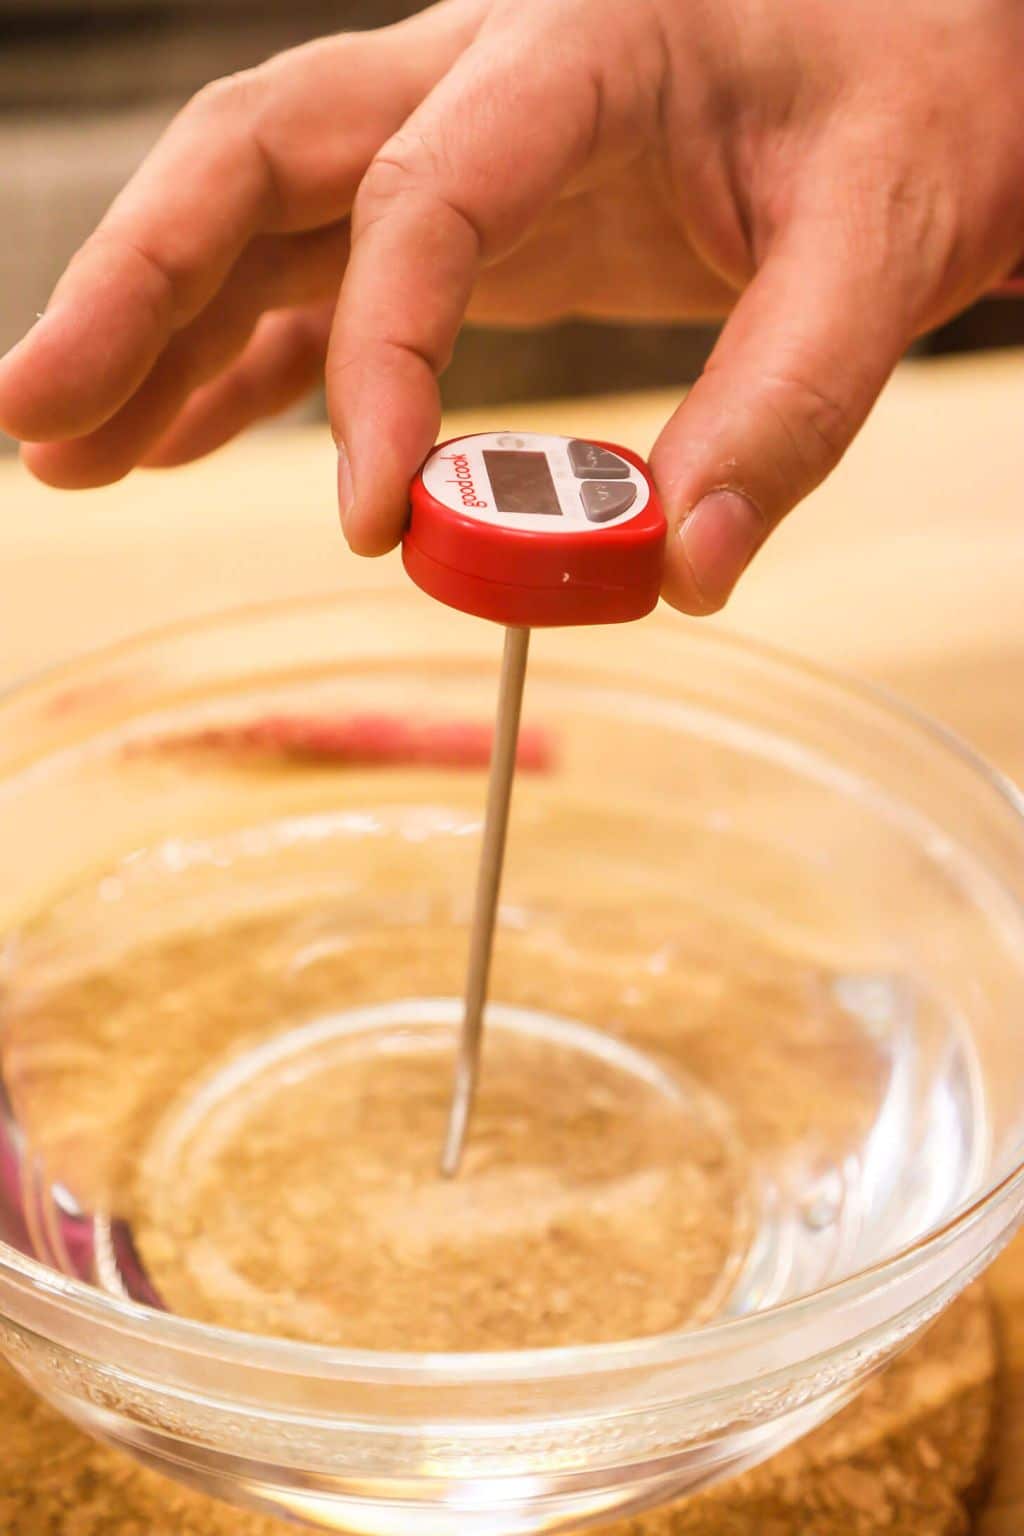 How to Calibrate a Thermometer